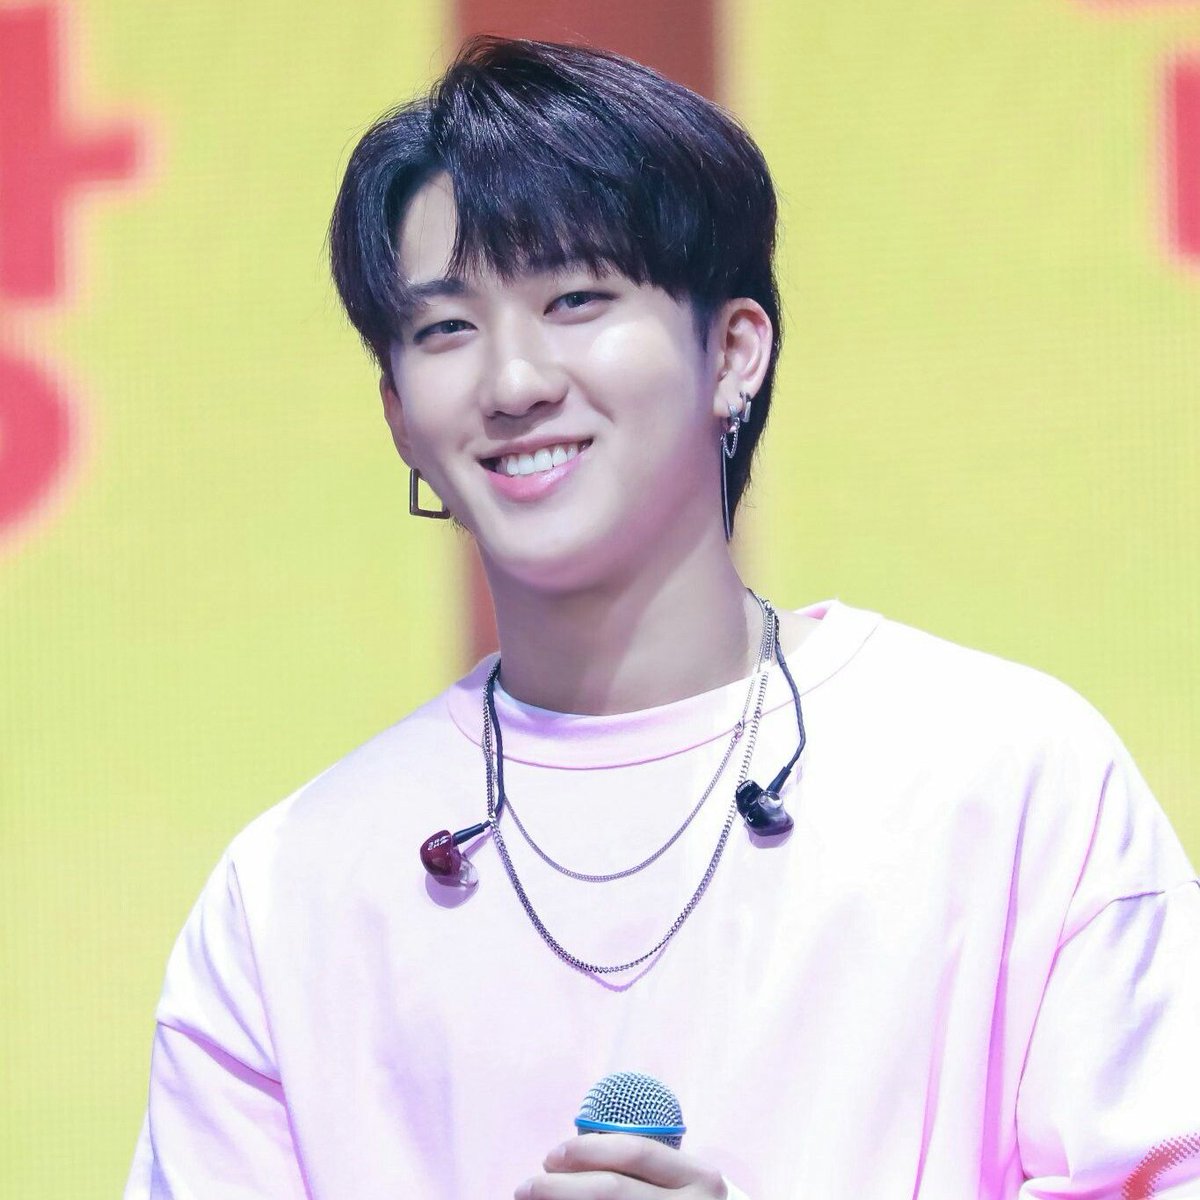 Changbin - Cherry Blossom"Pure Hearted"